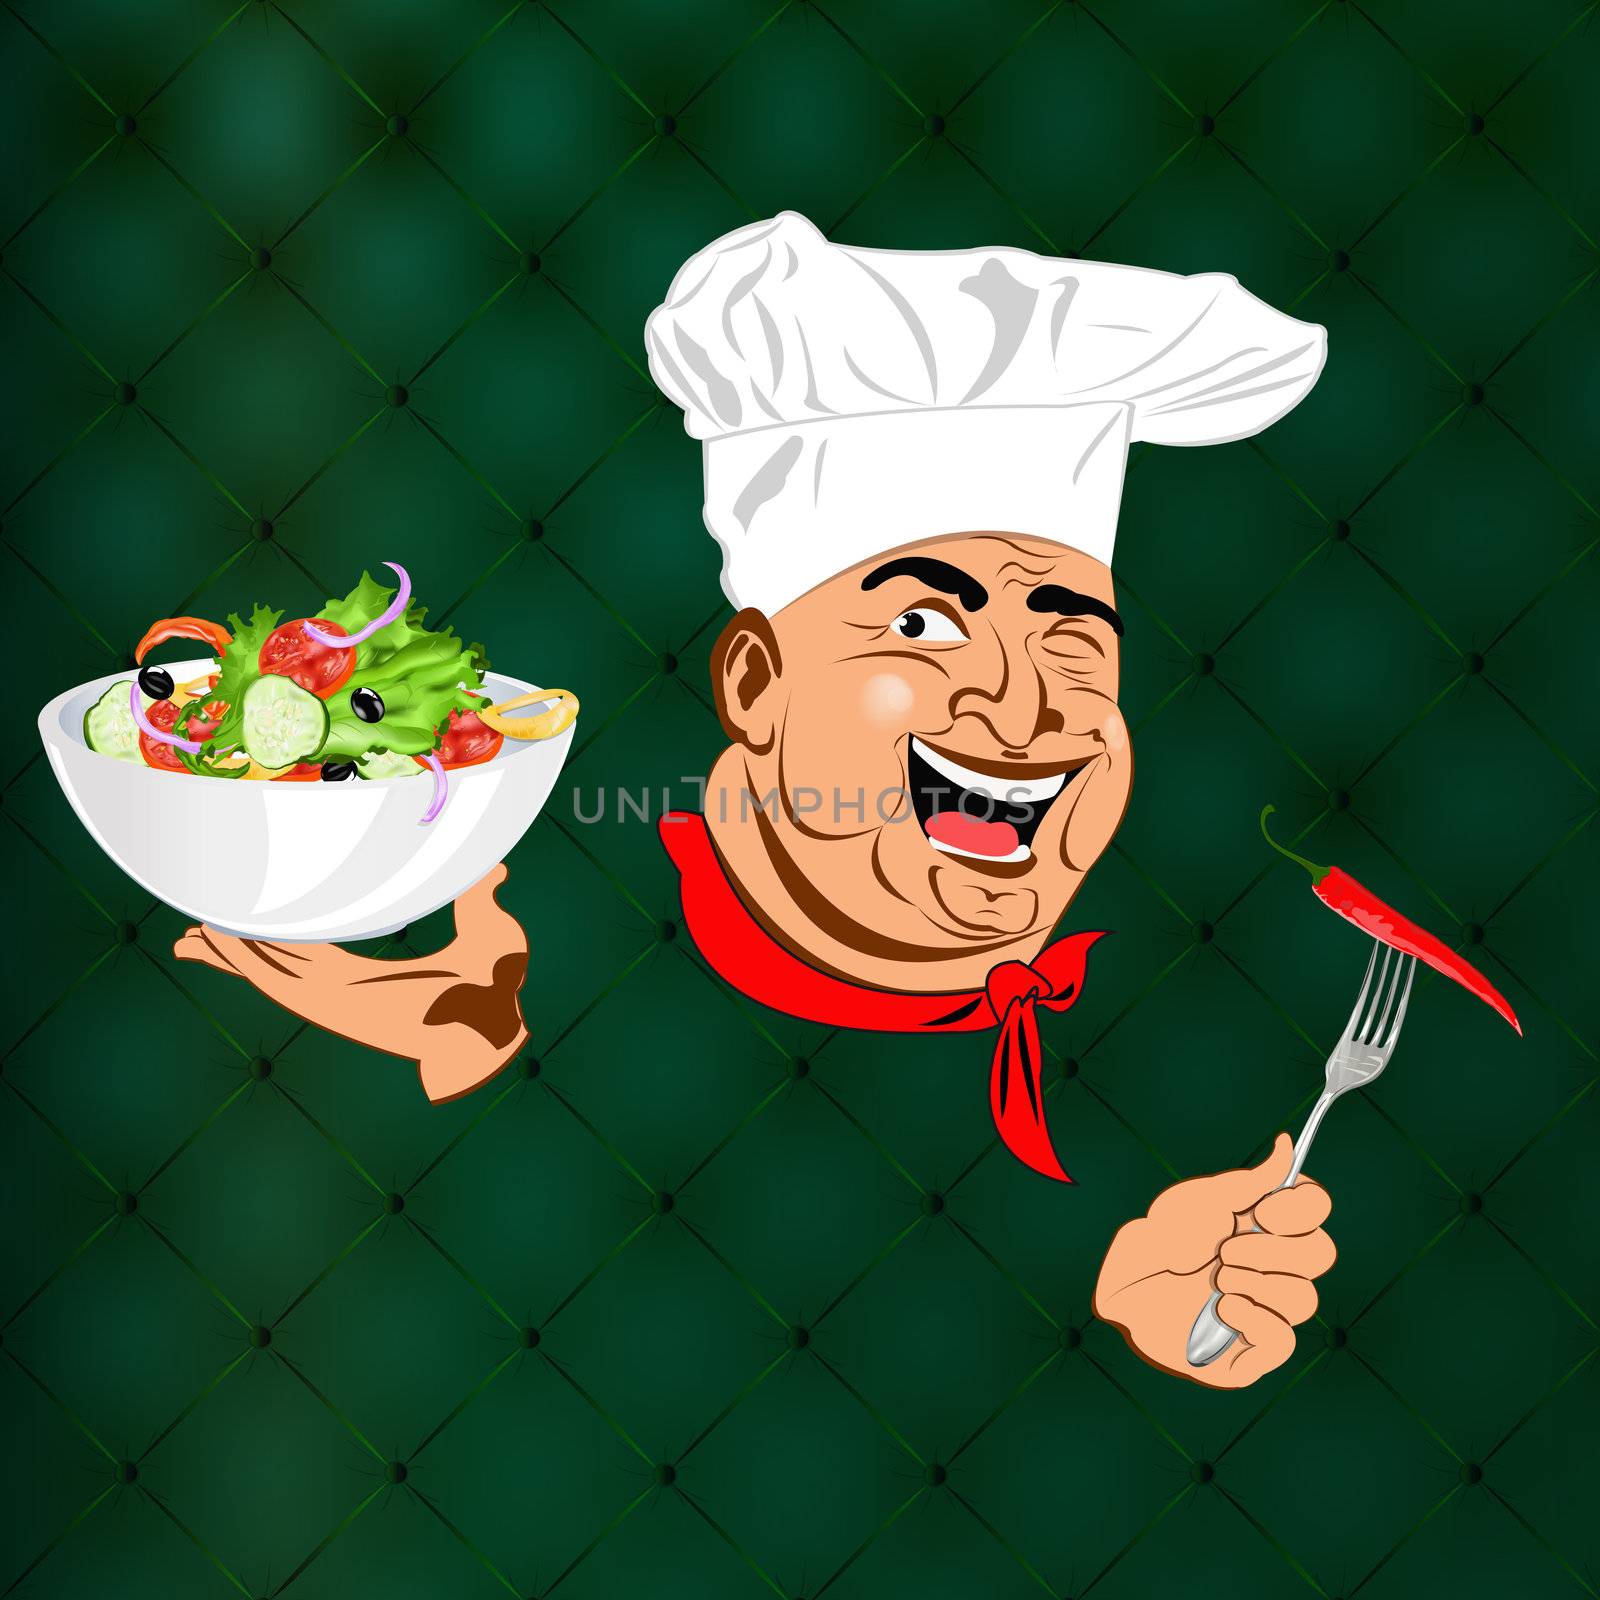 Funny Chef and best vegetarian vegetable by sergey150770SV